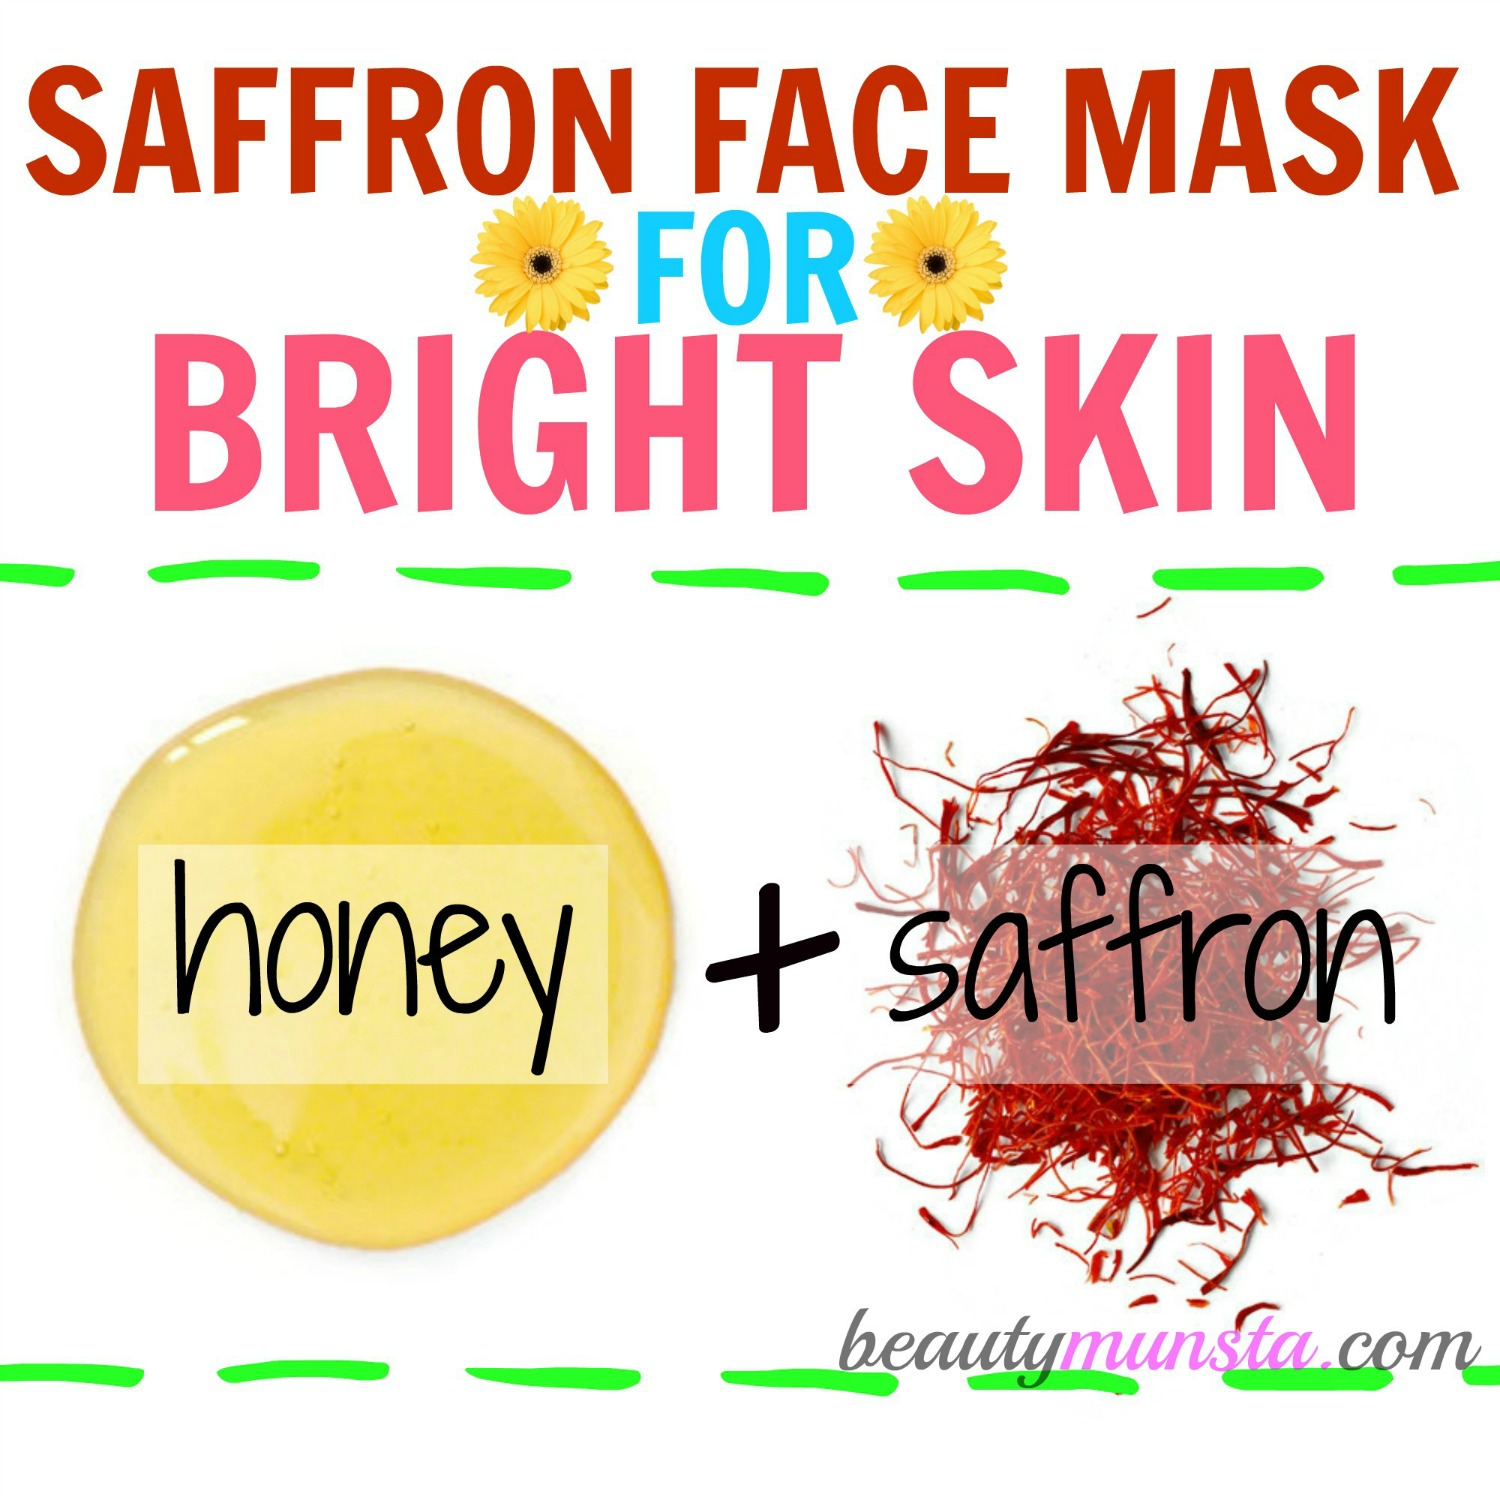 For baby soft & smooth skin try out this exotic saffron face mask